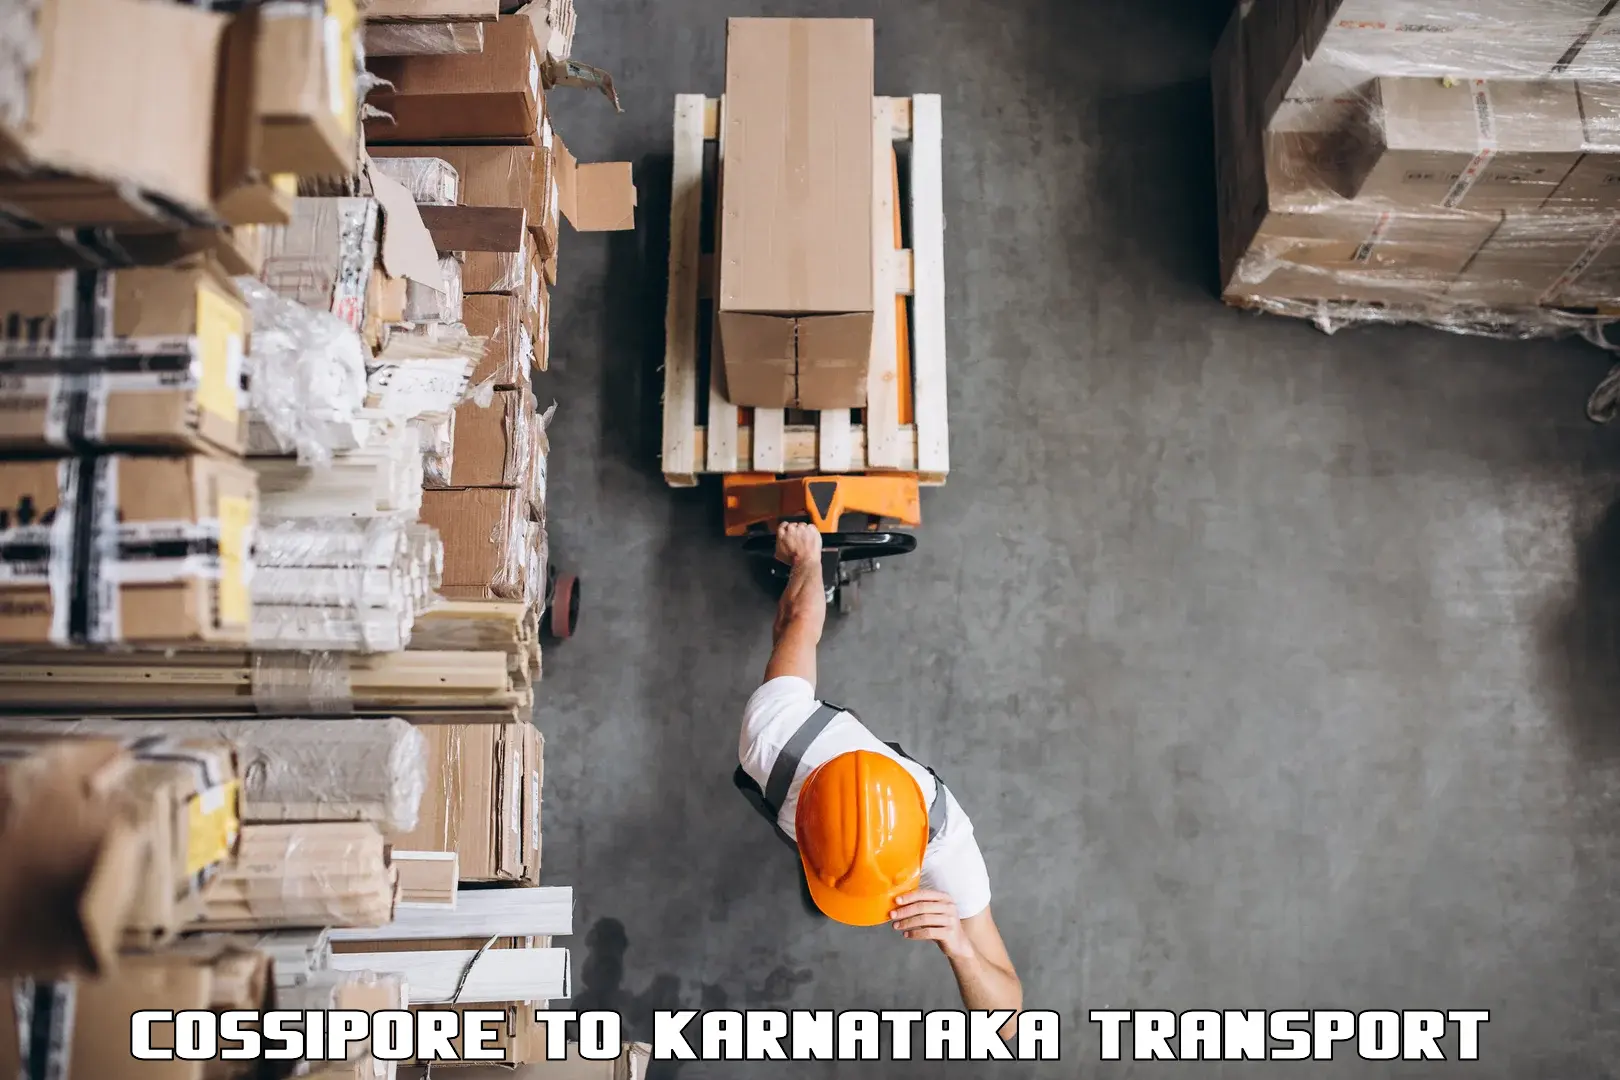 Goods delivery service Cossipore to Mangalore Port